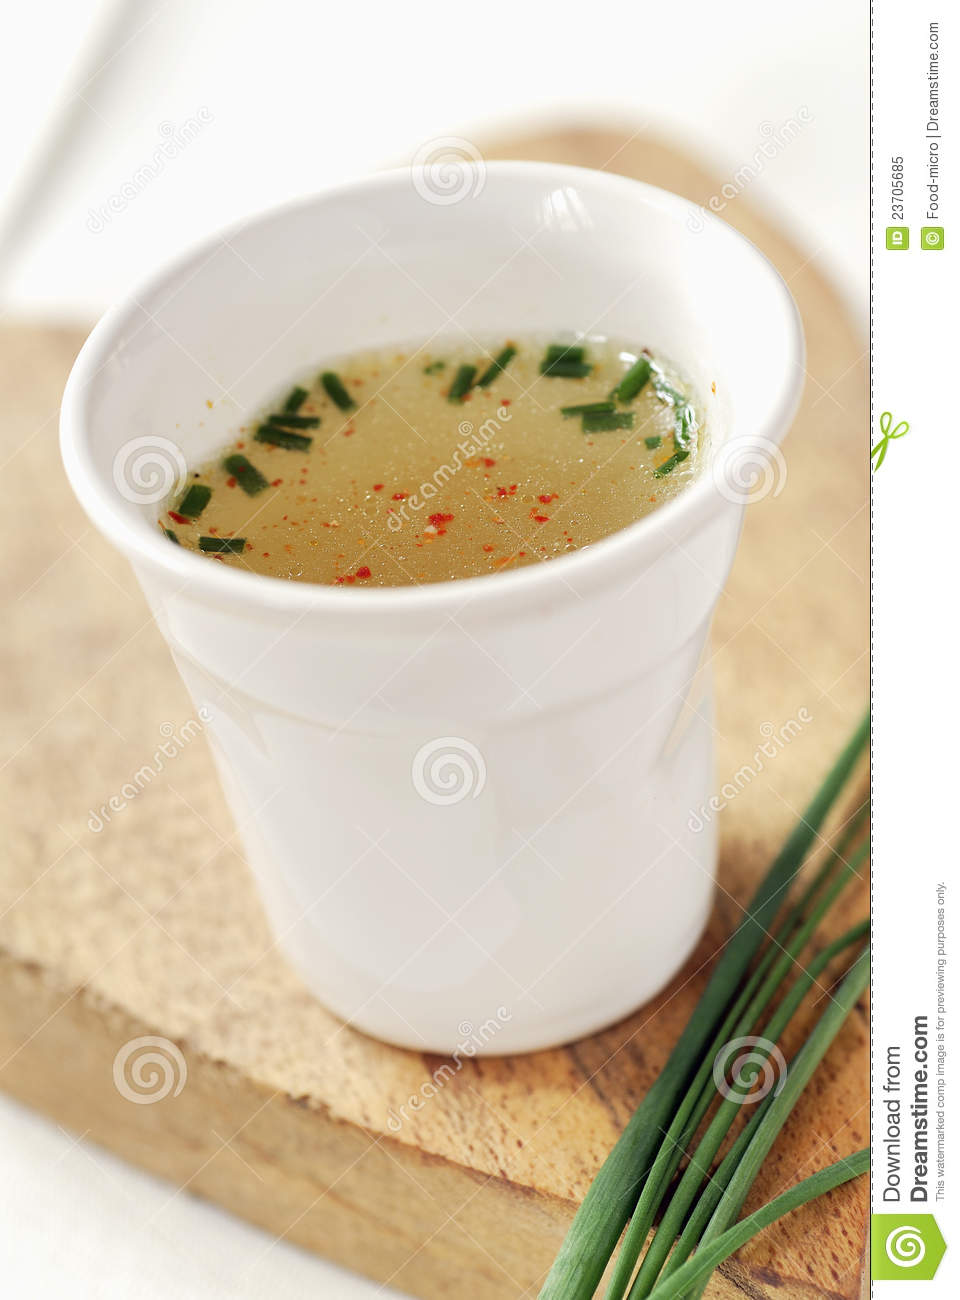 Spicy Chicken Broth Royalty Free Stock Photo   Image  23705685